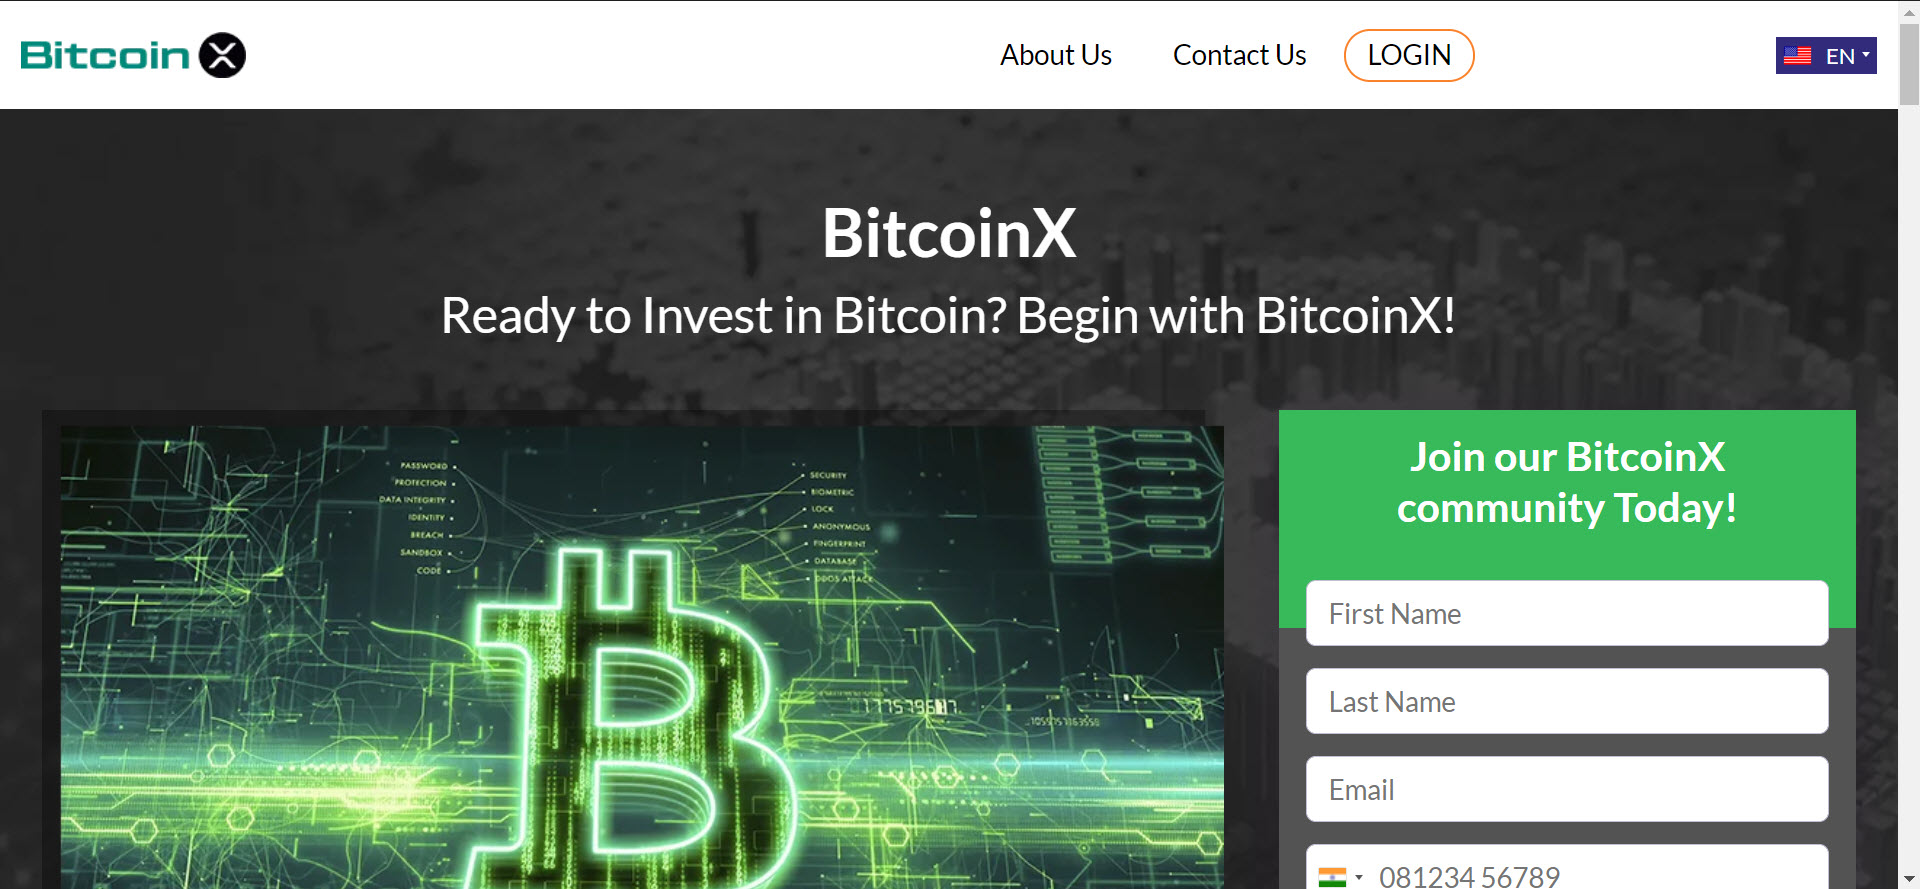 Find A Quick Way To Bitcoin Bank